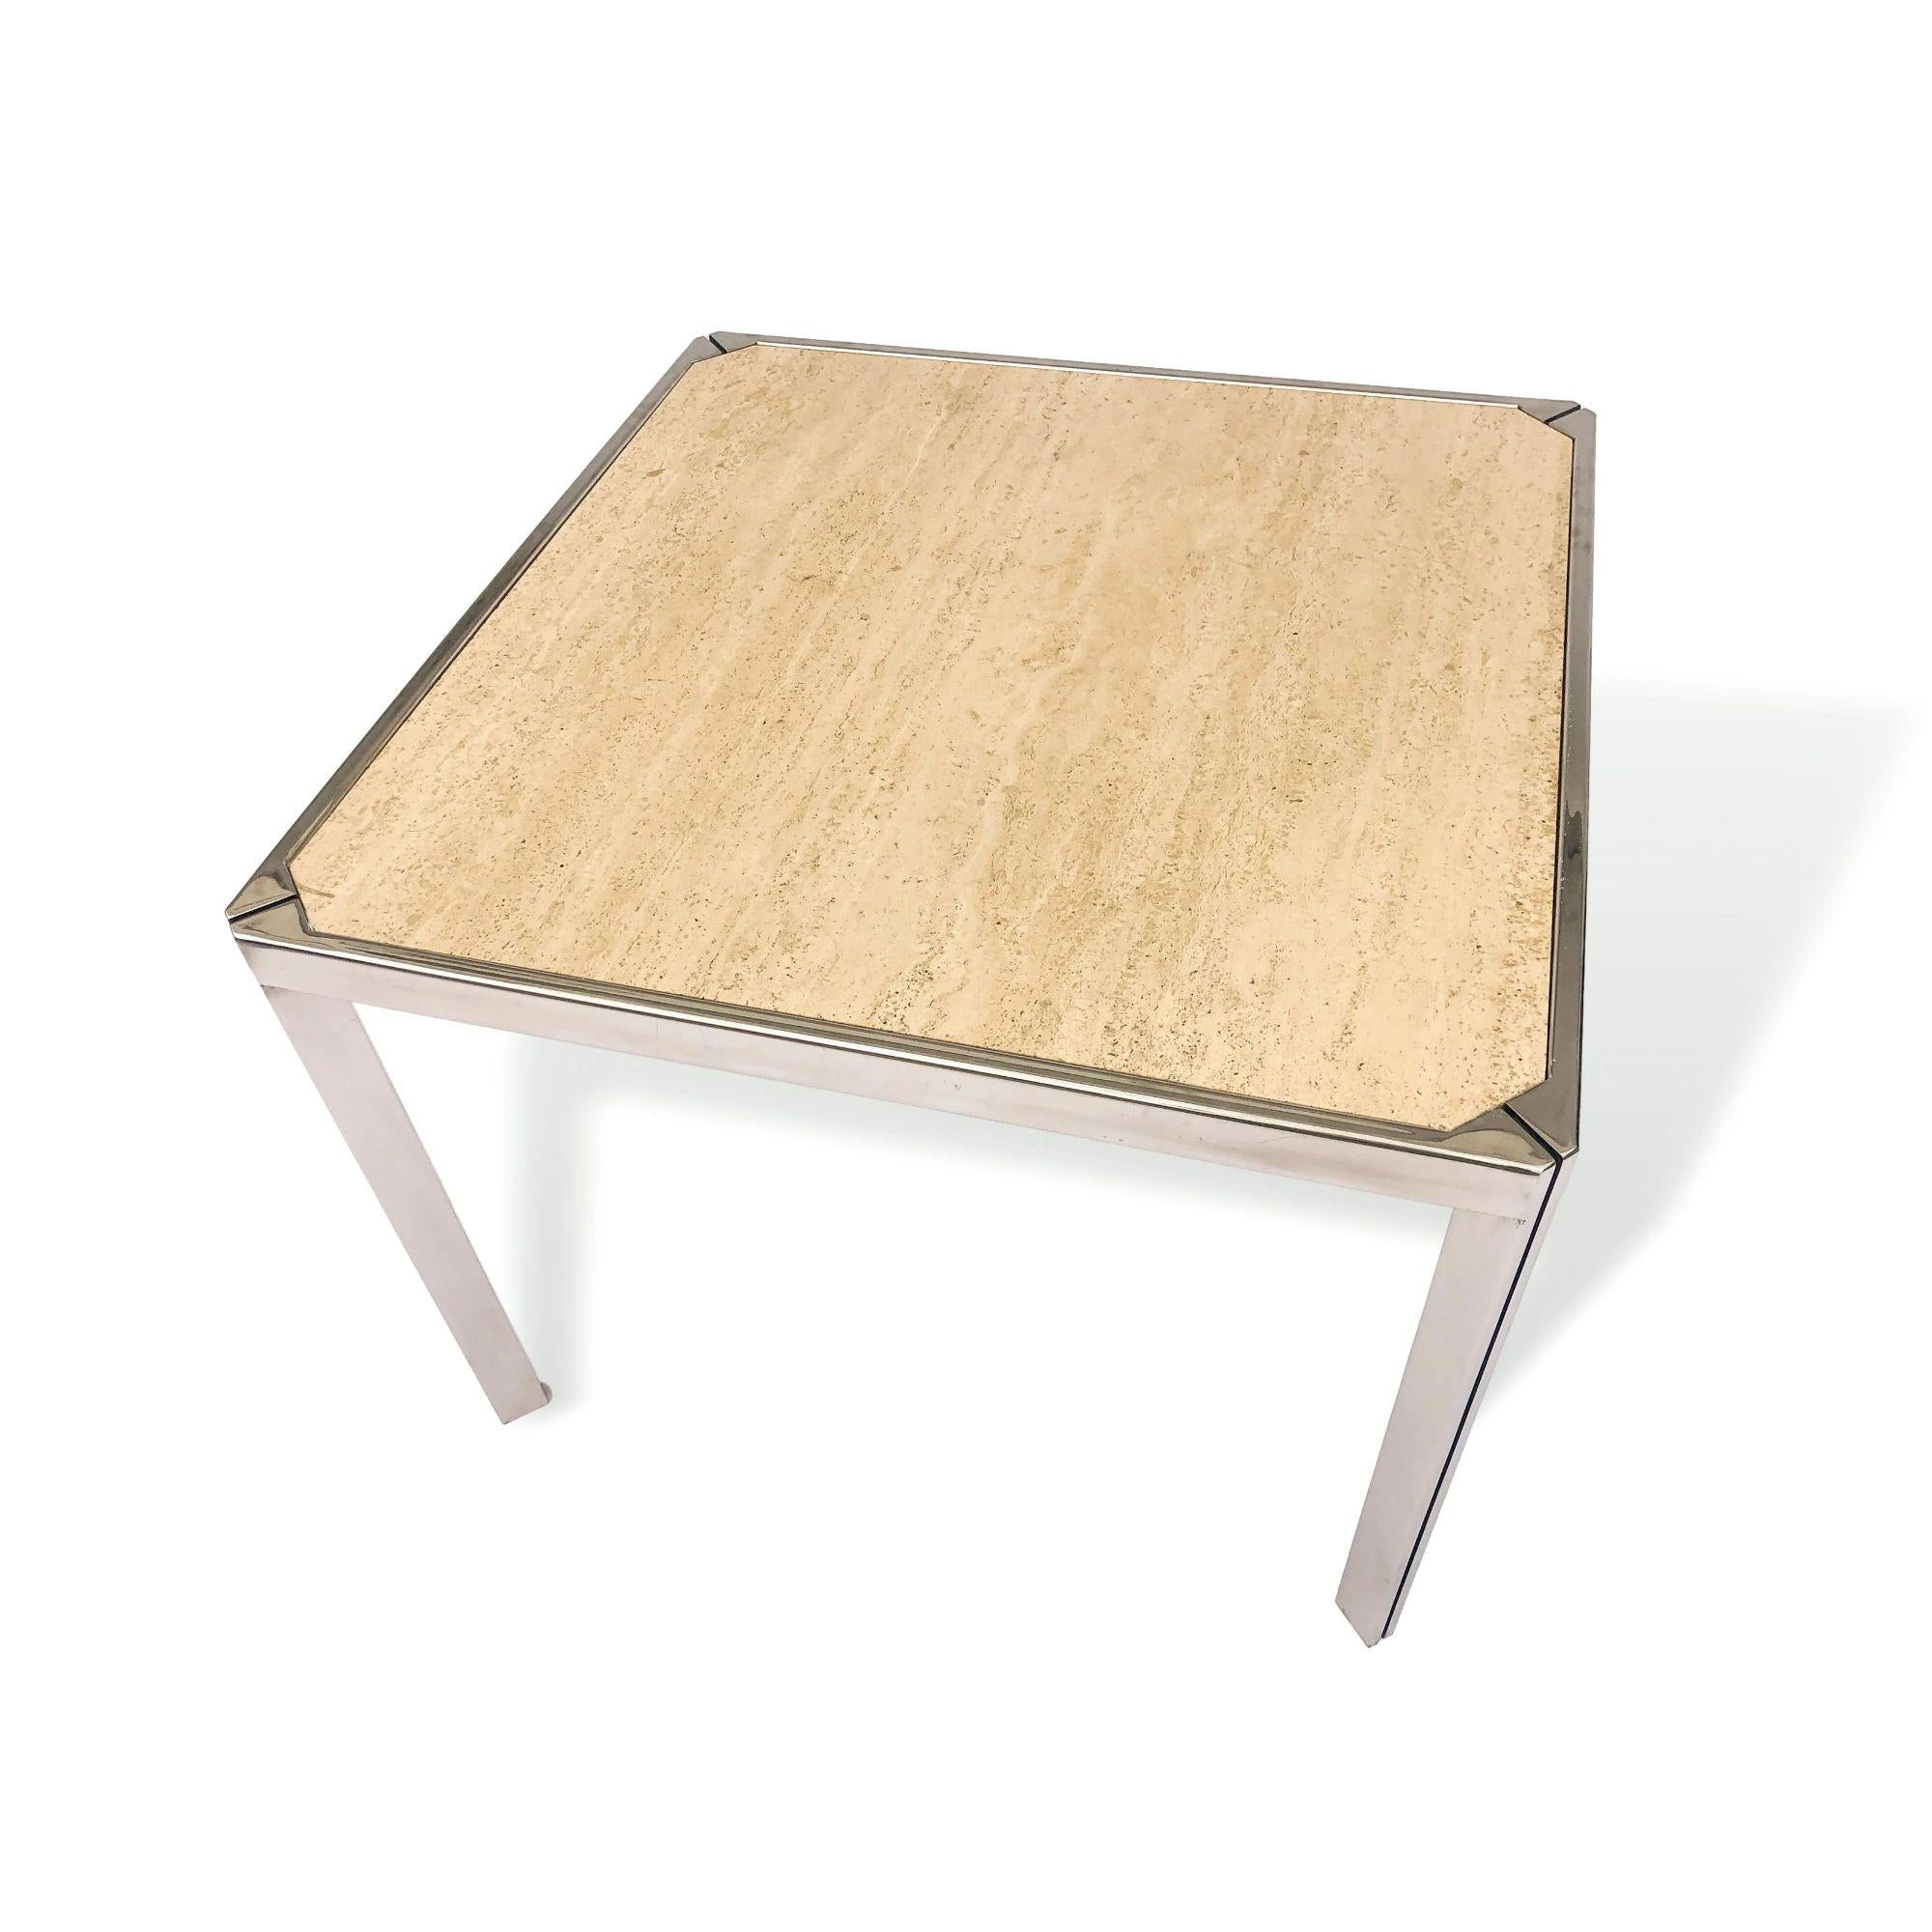 Mid-Century Modern Vintage Dining Table or Game Table in Travertine Marble and Nickel, 1970s